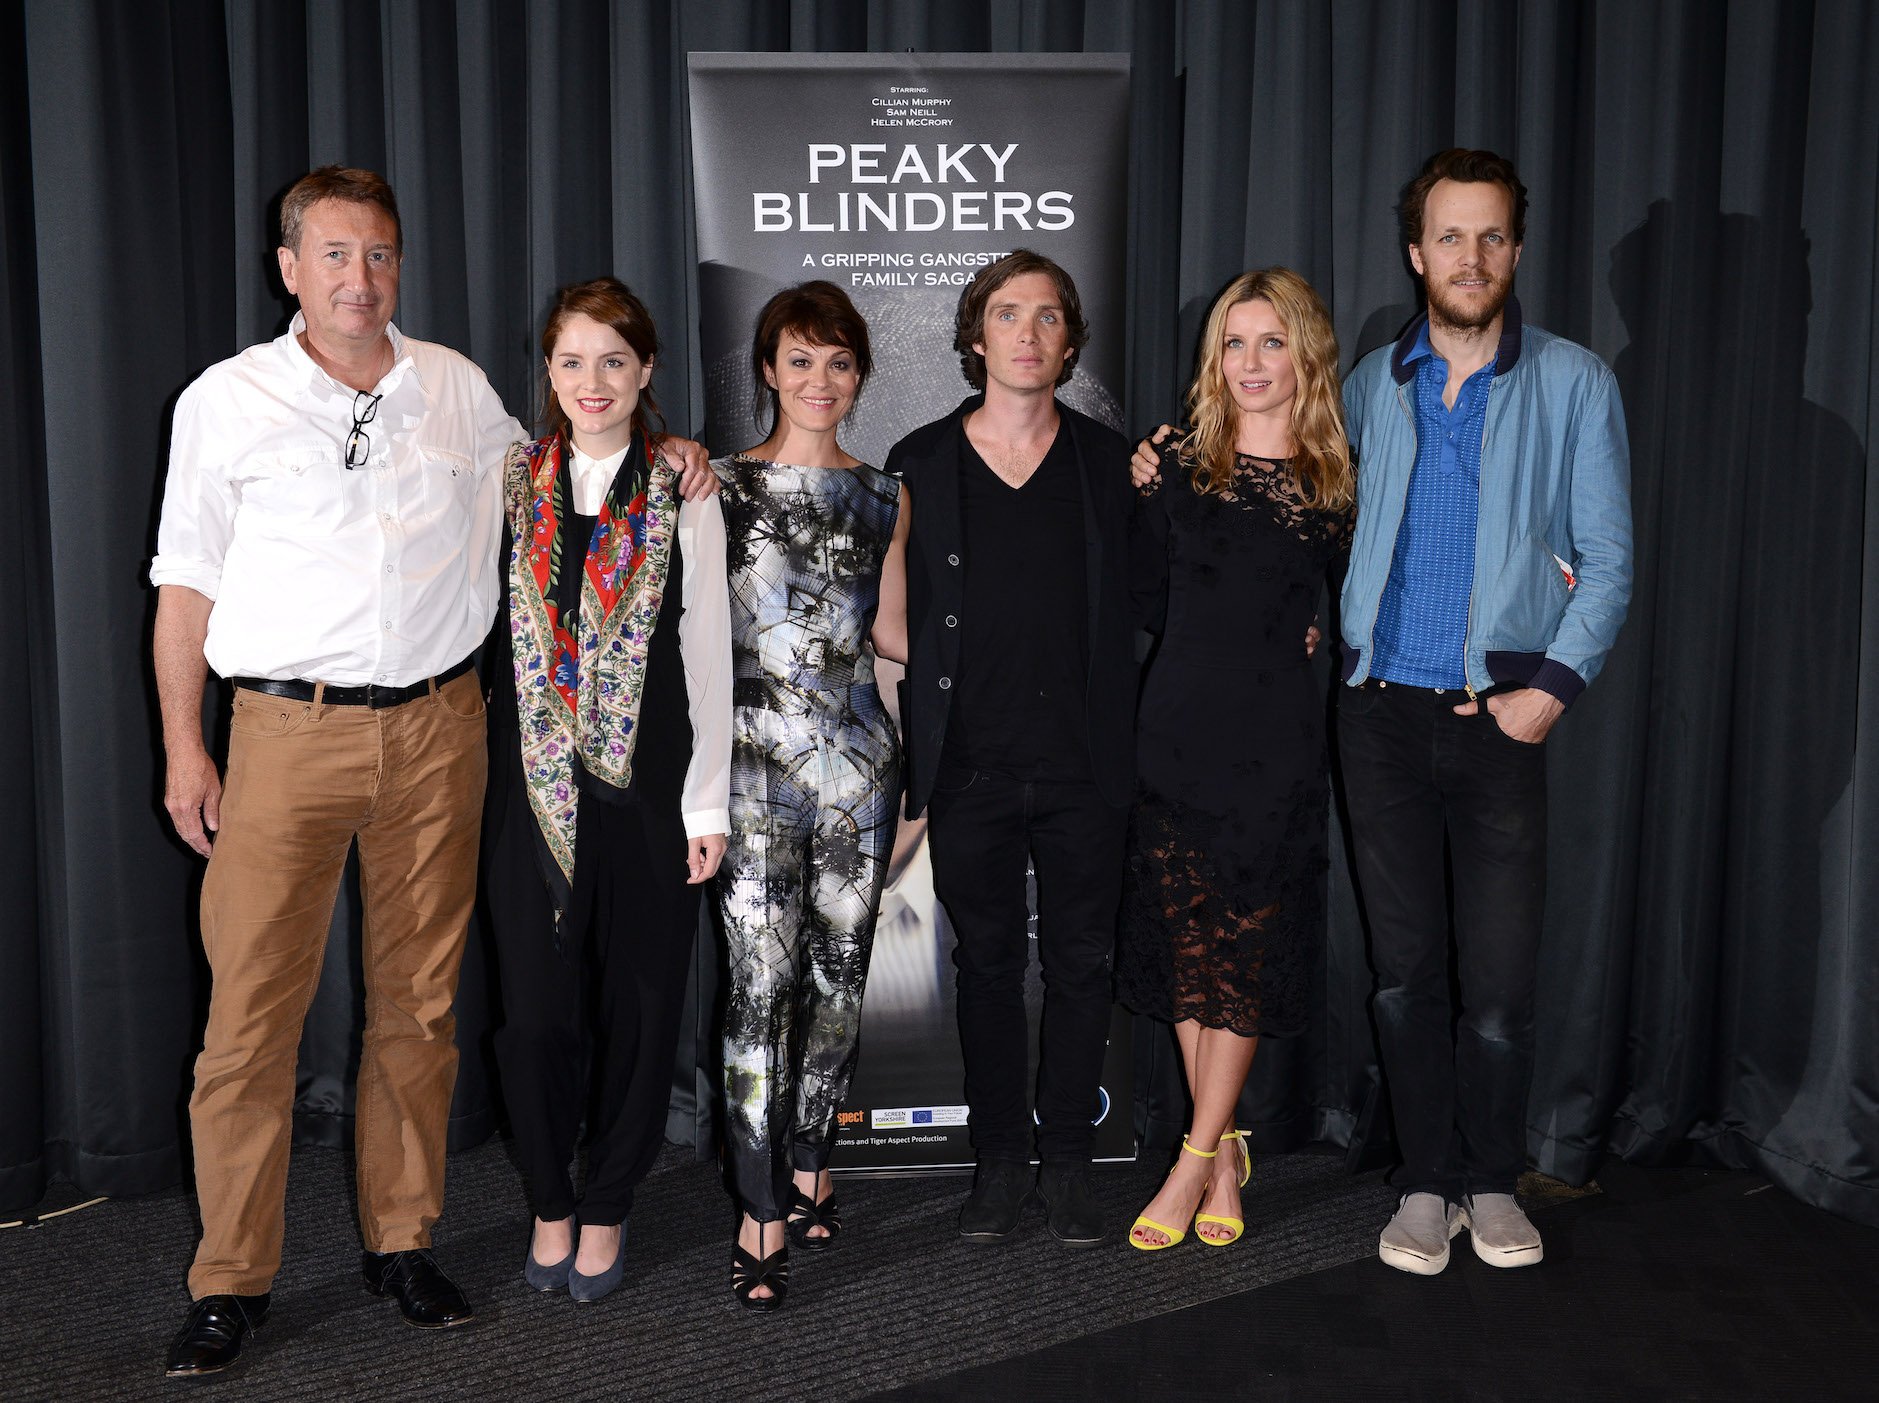 Writer/Producer Steven Knight of 'Peaky Blinders' Season 6 standing with Sophie Rundle, Helen McCrory, Cillian Murphy, Annabelle Wallis and director Otto Bathurst attend the screening of 'Peaky Blinders' 